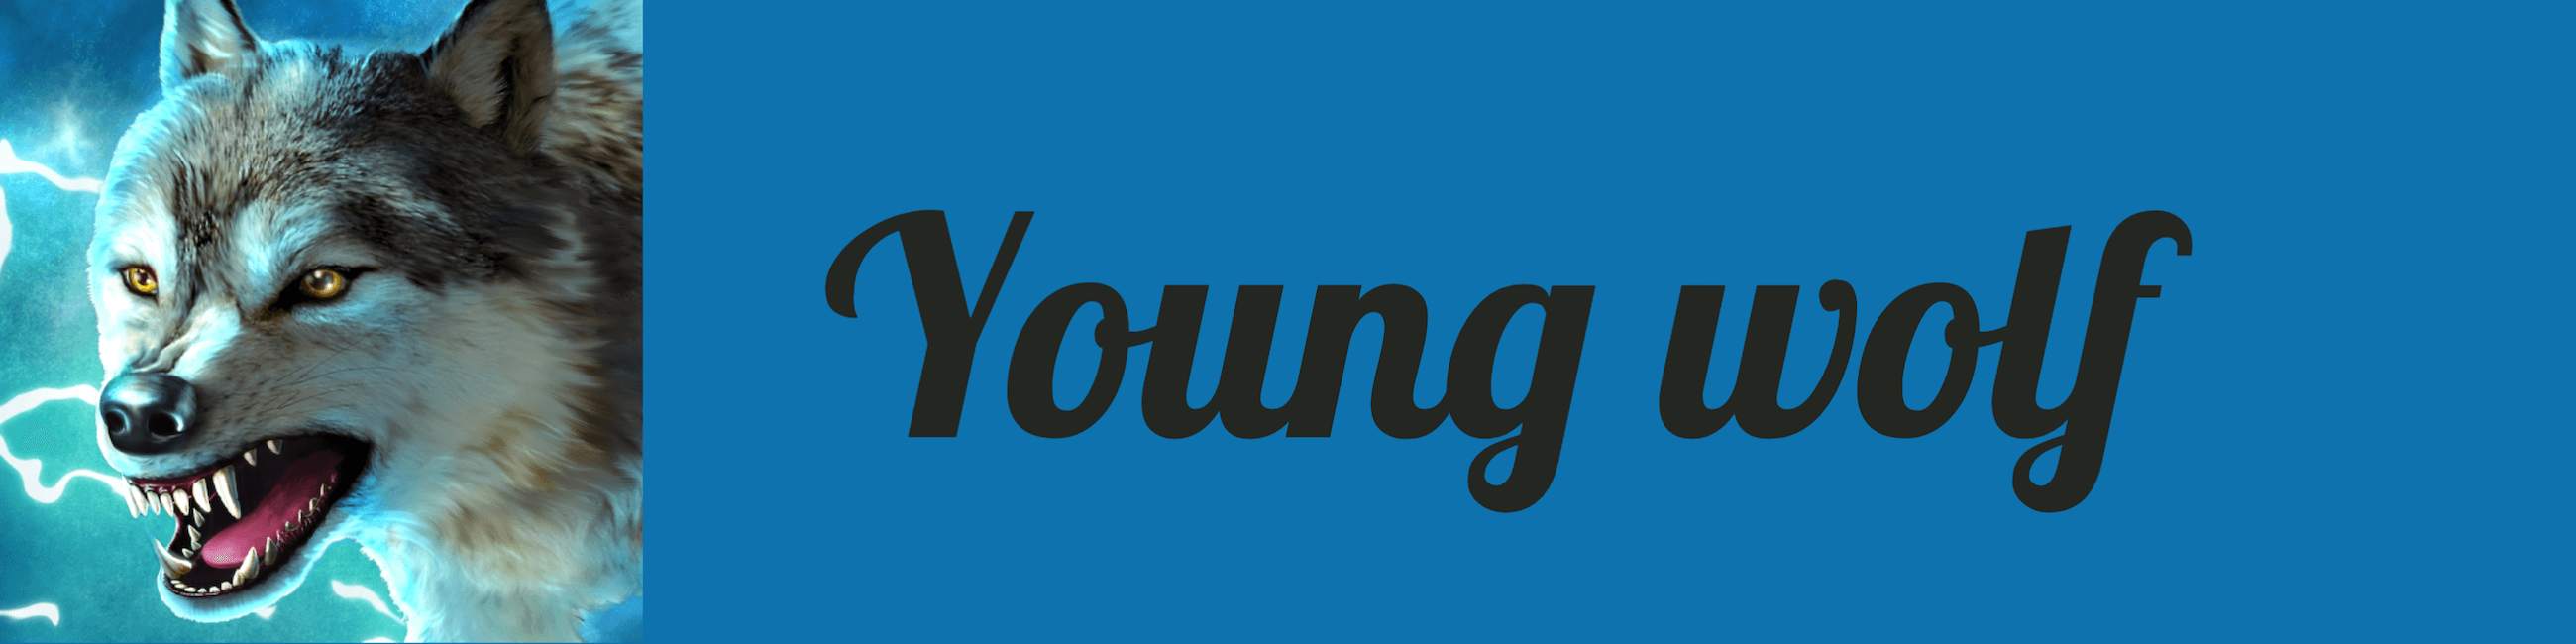 Theyoungwolf22 banner